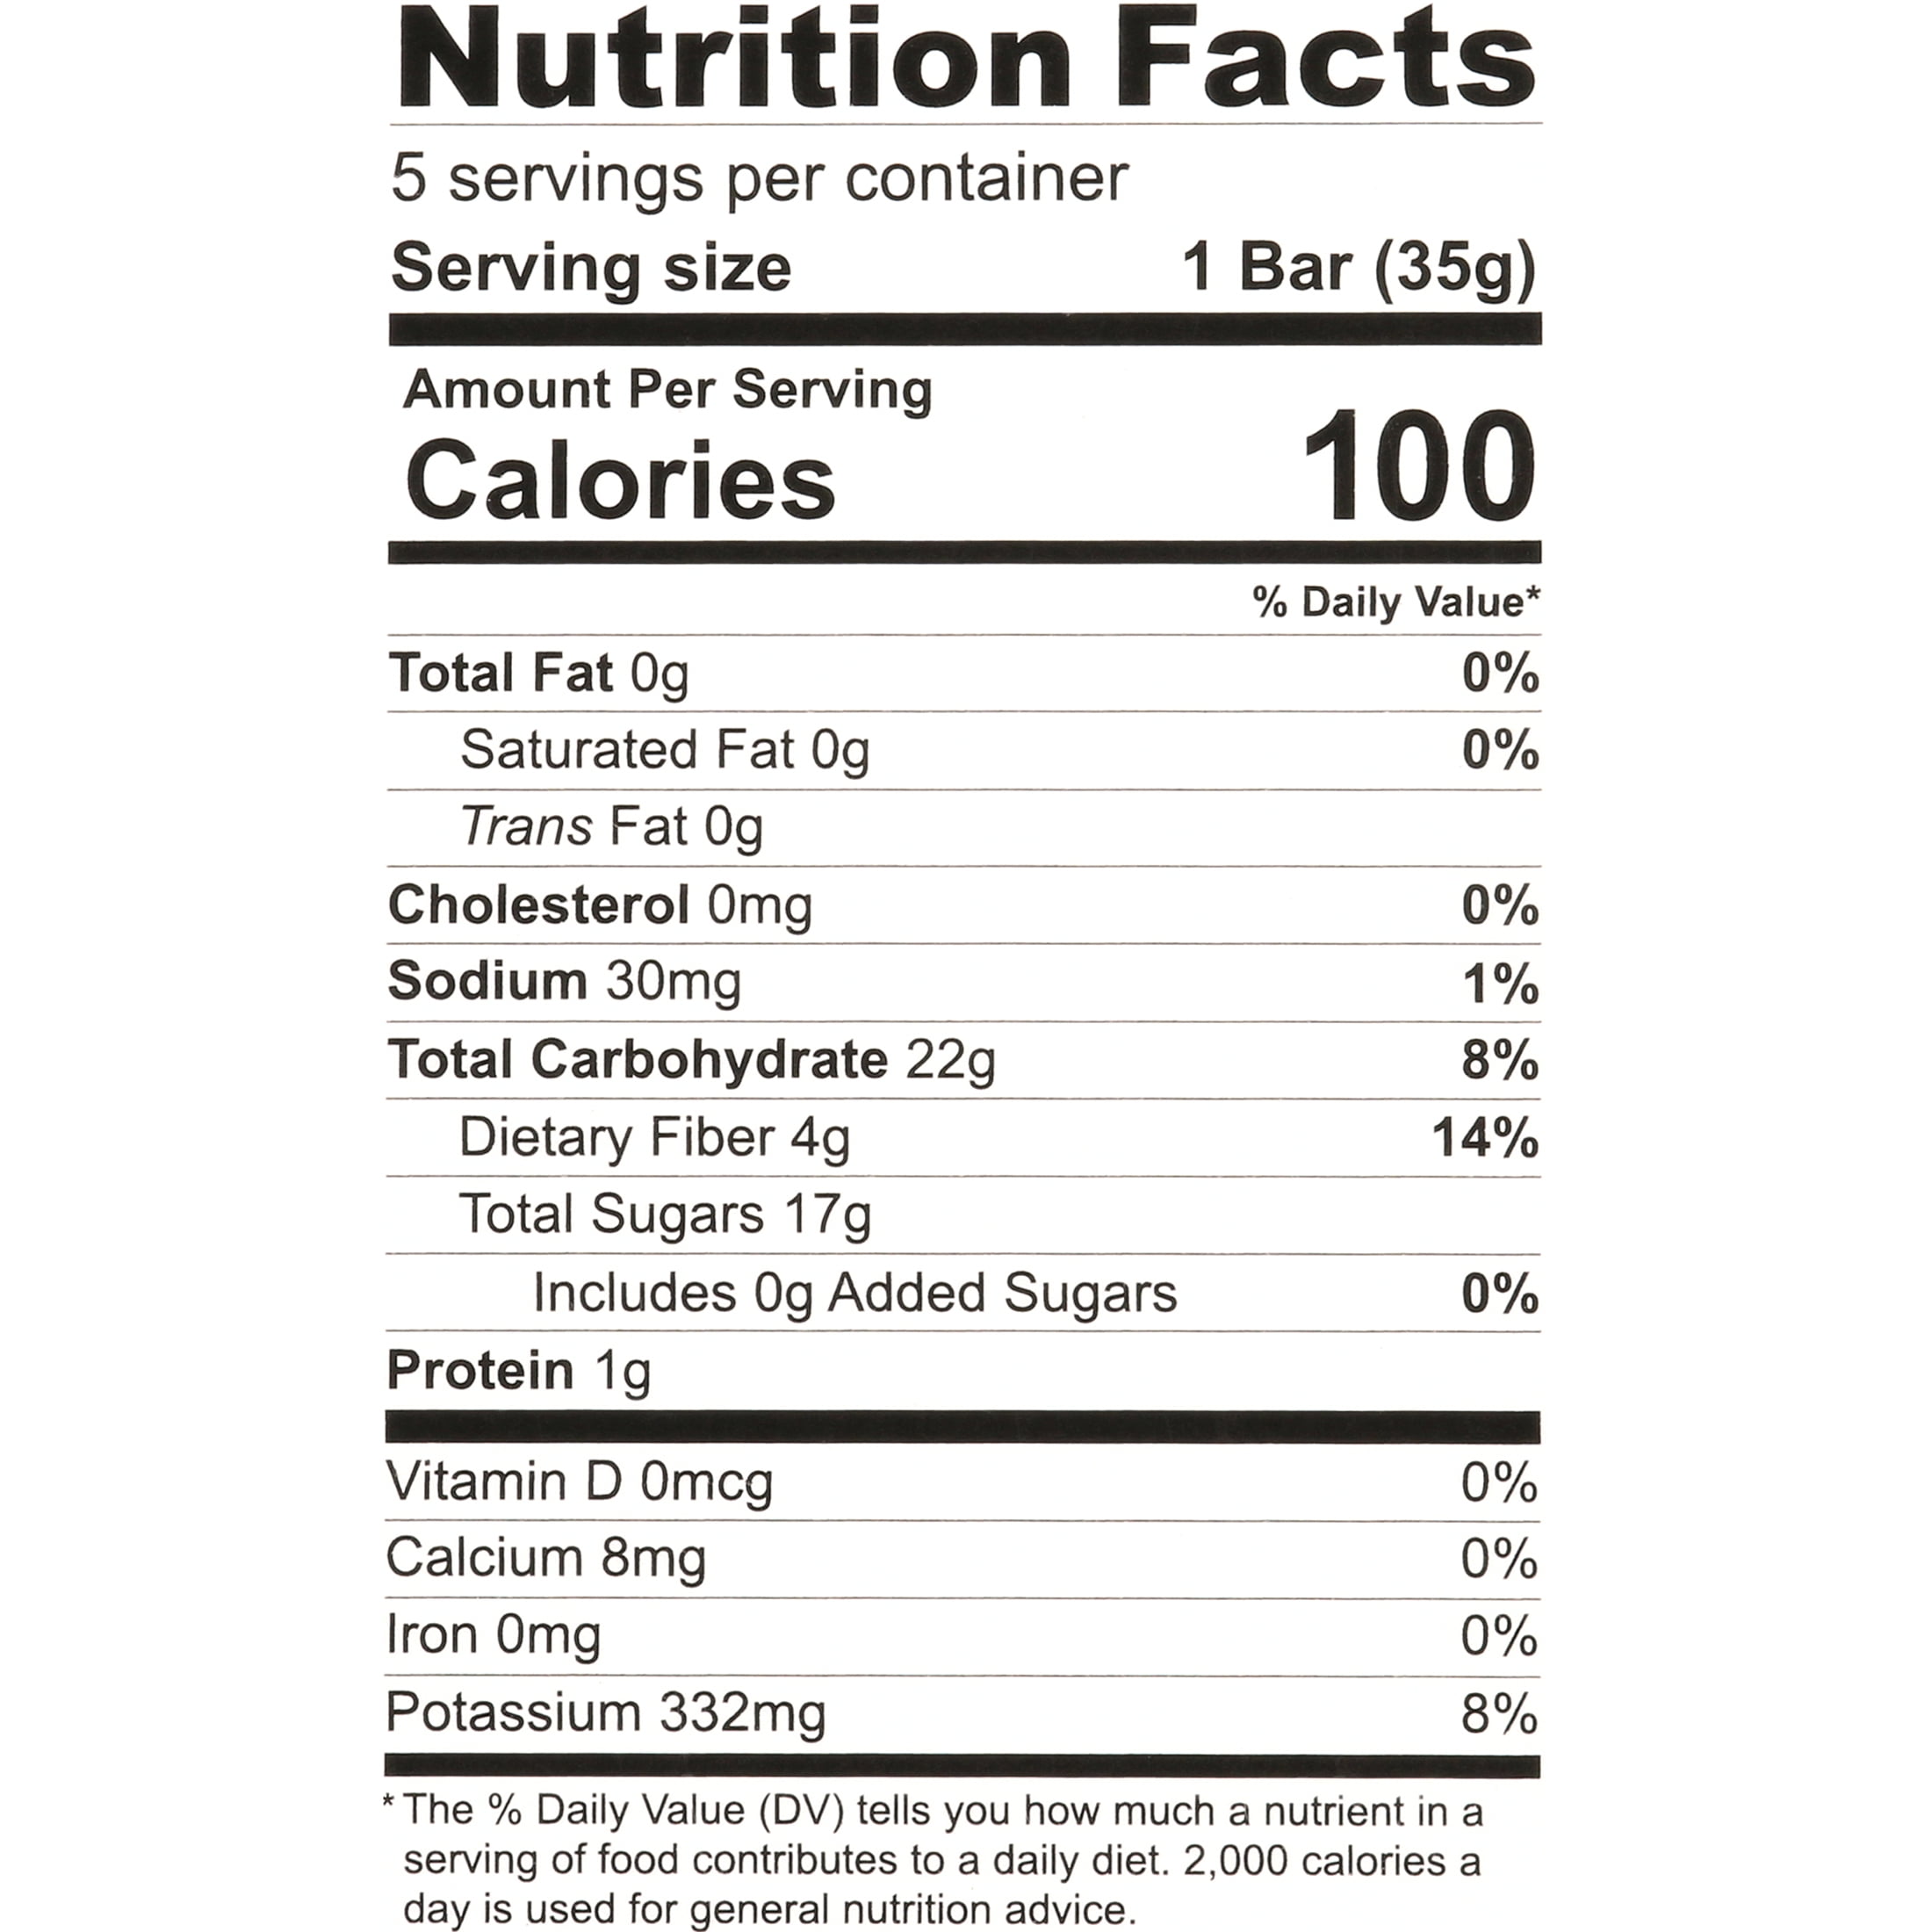 That's It. Apple And Strawberry Nutrition Bar - 6oz - 5ct